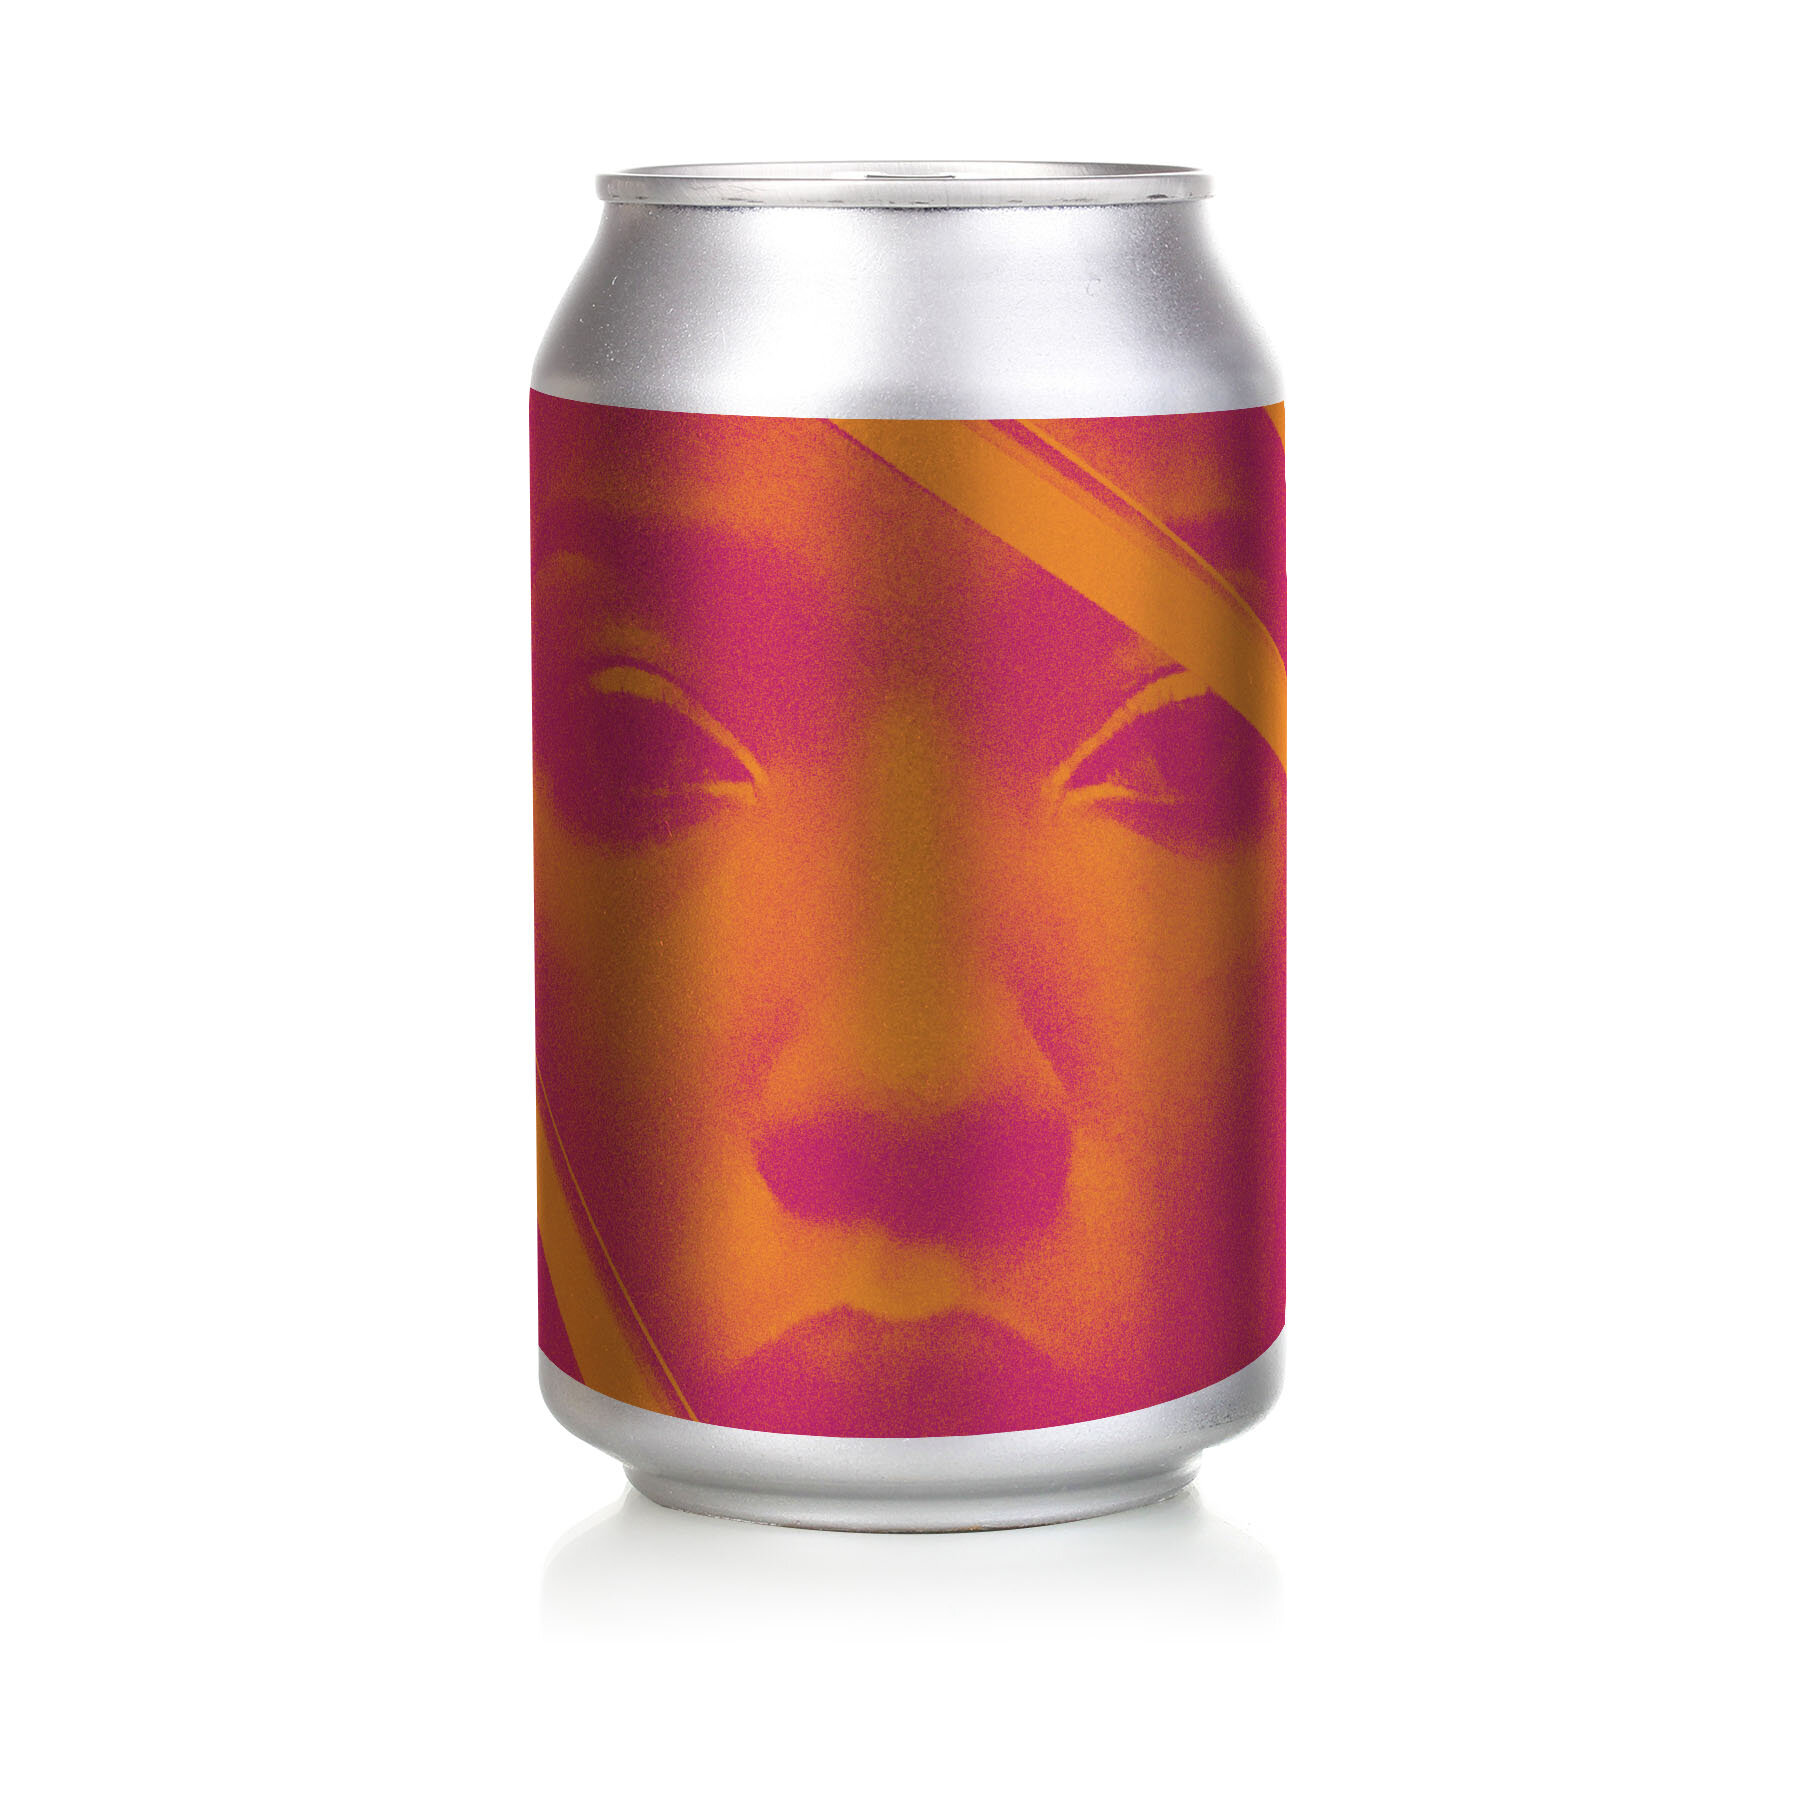 CANS — Spike Brewery